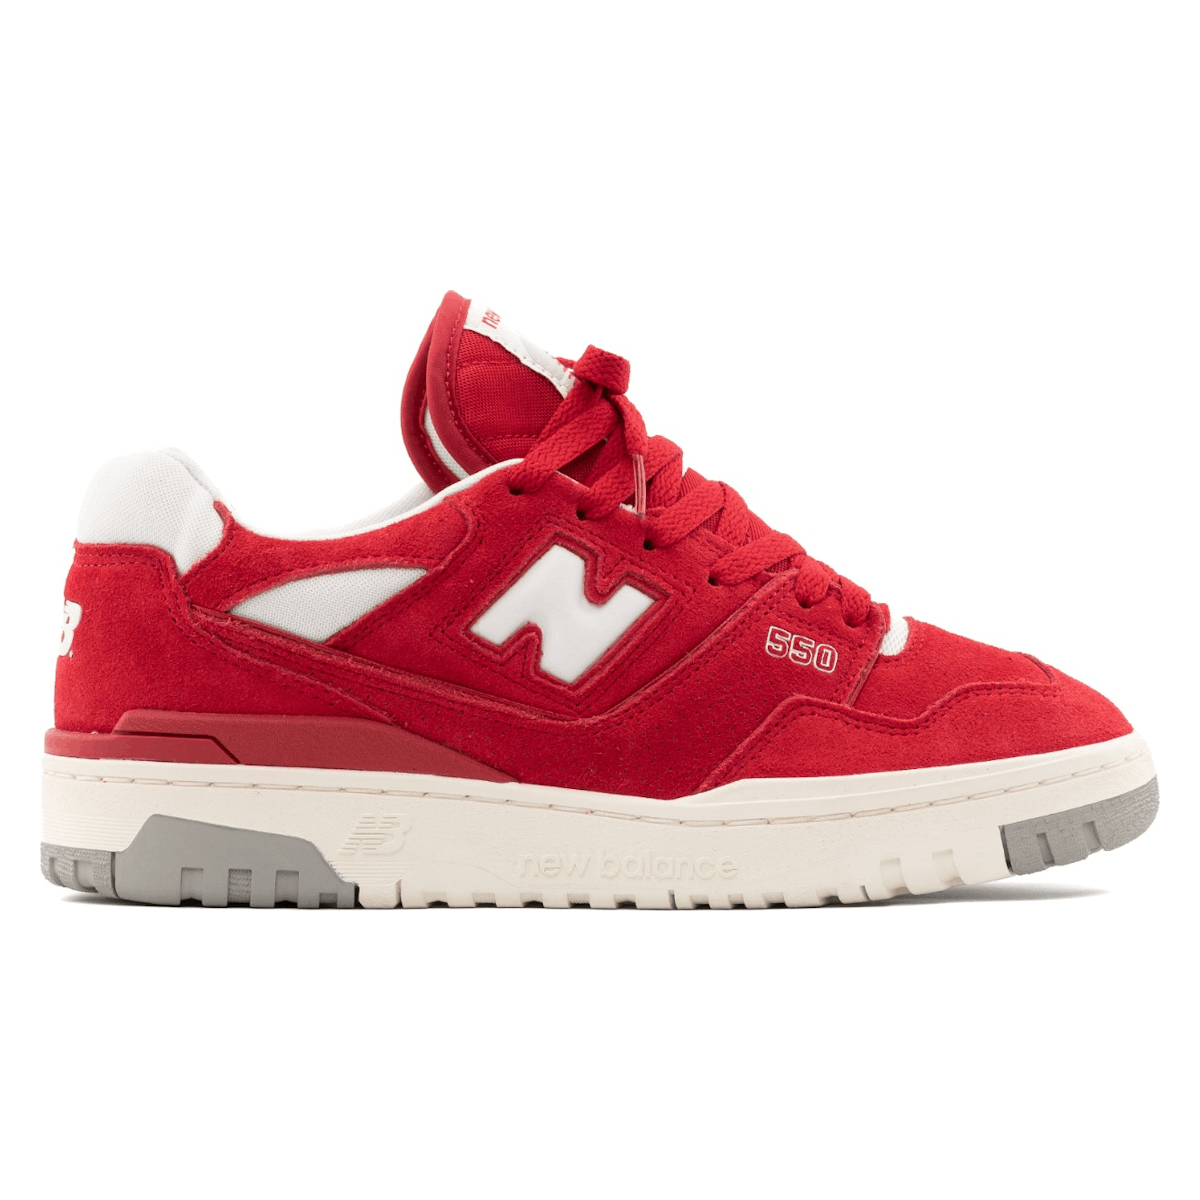 New Balance 550 Suede Pack Team Red